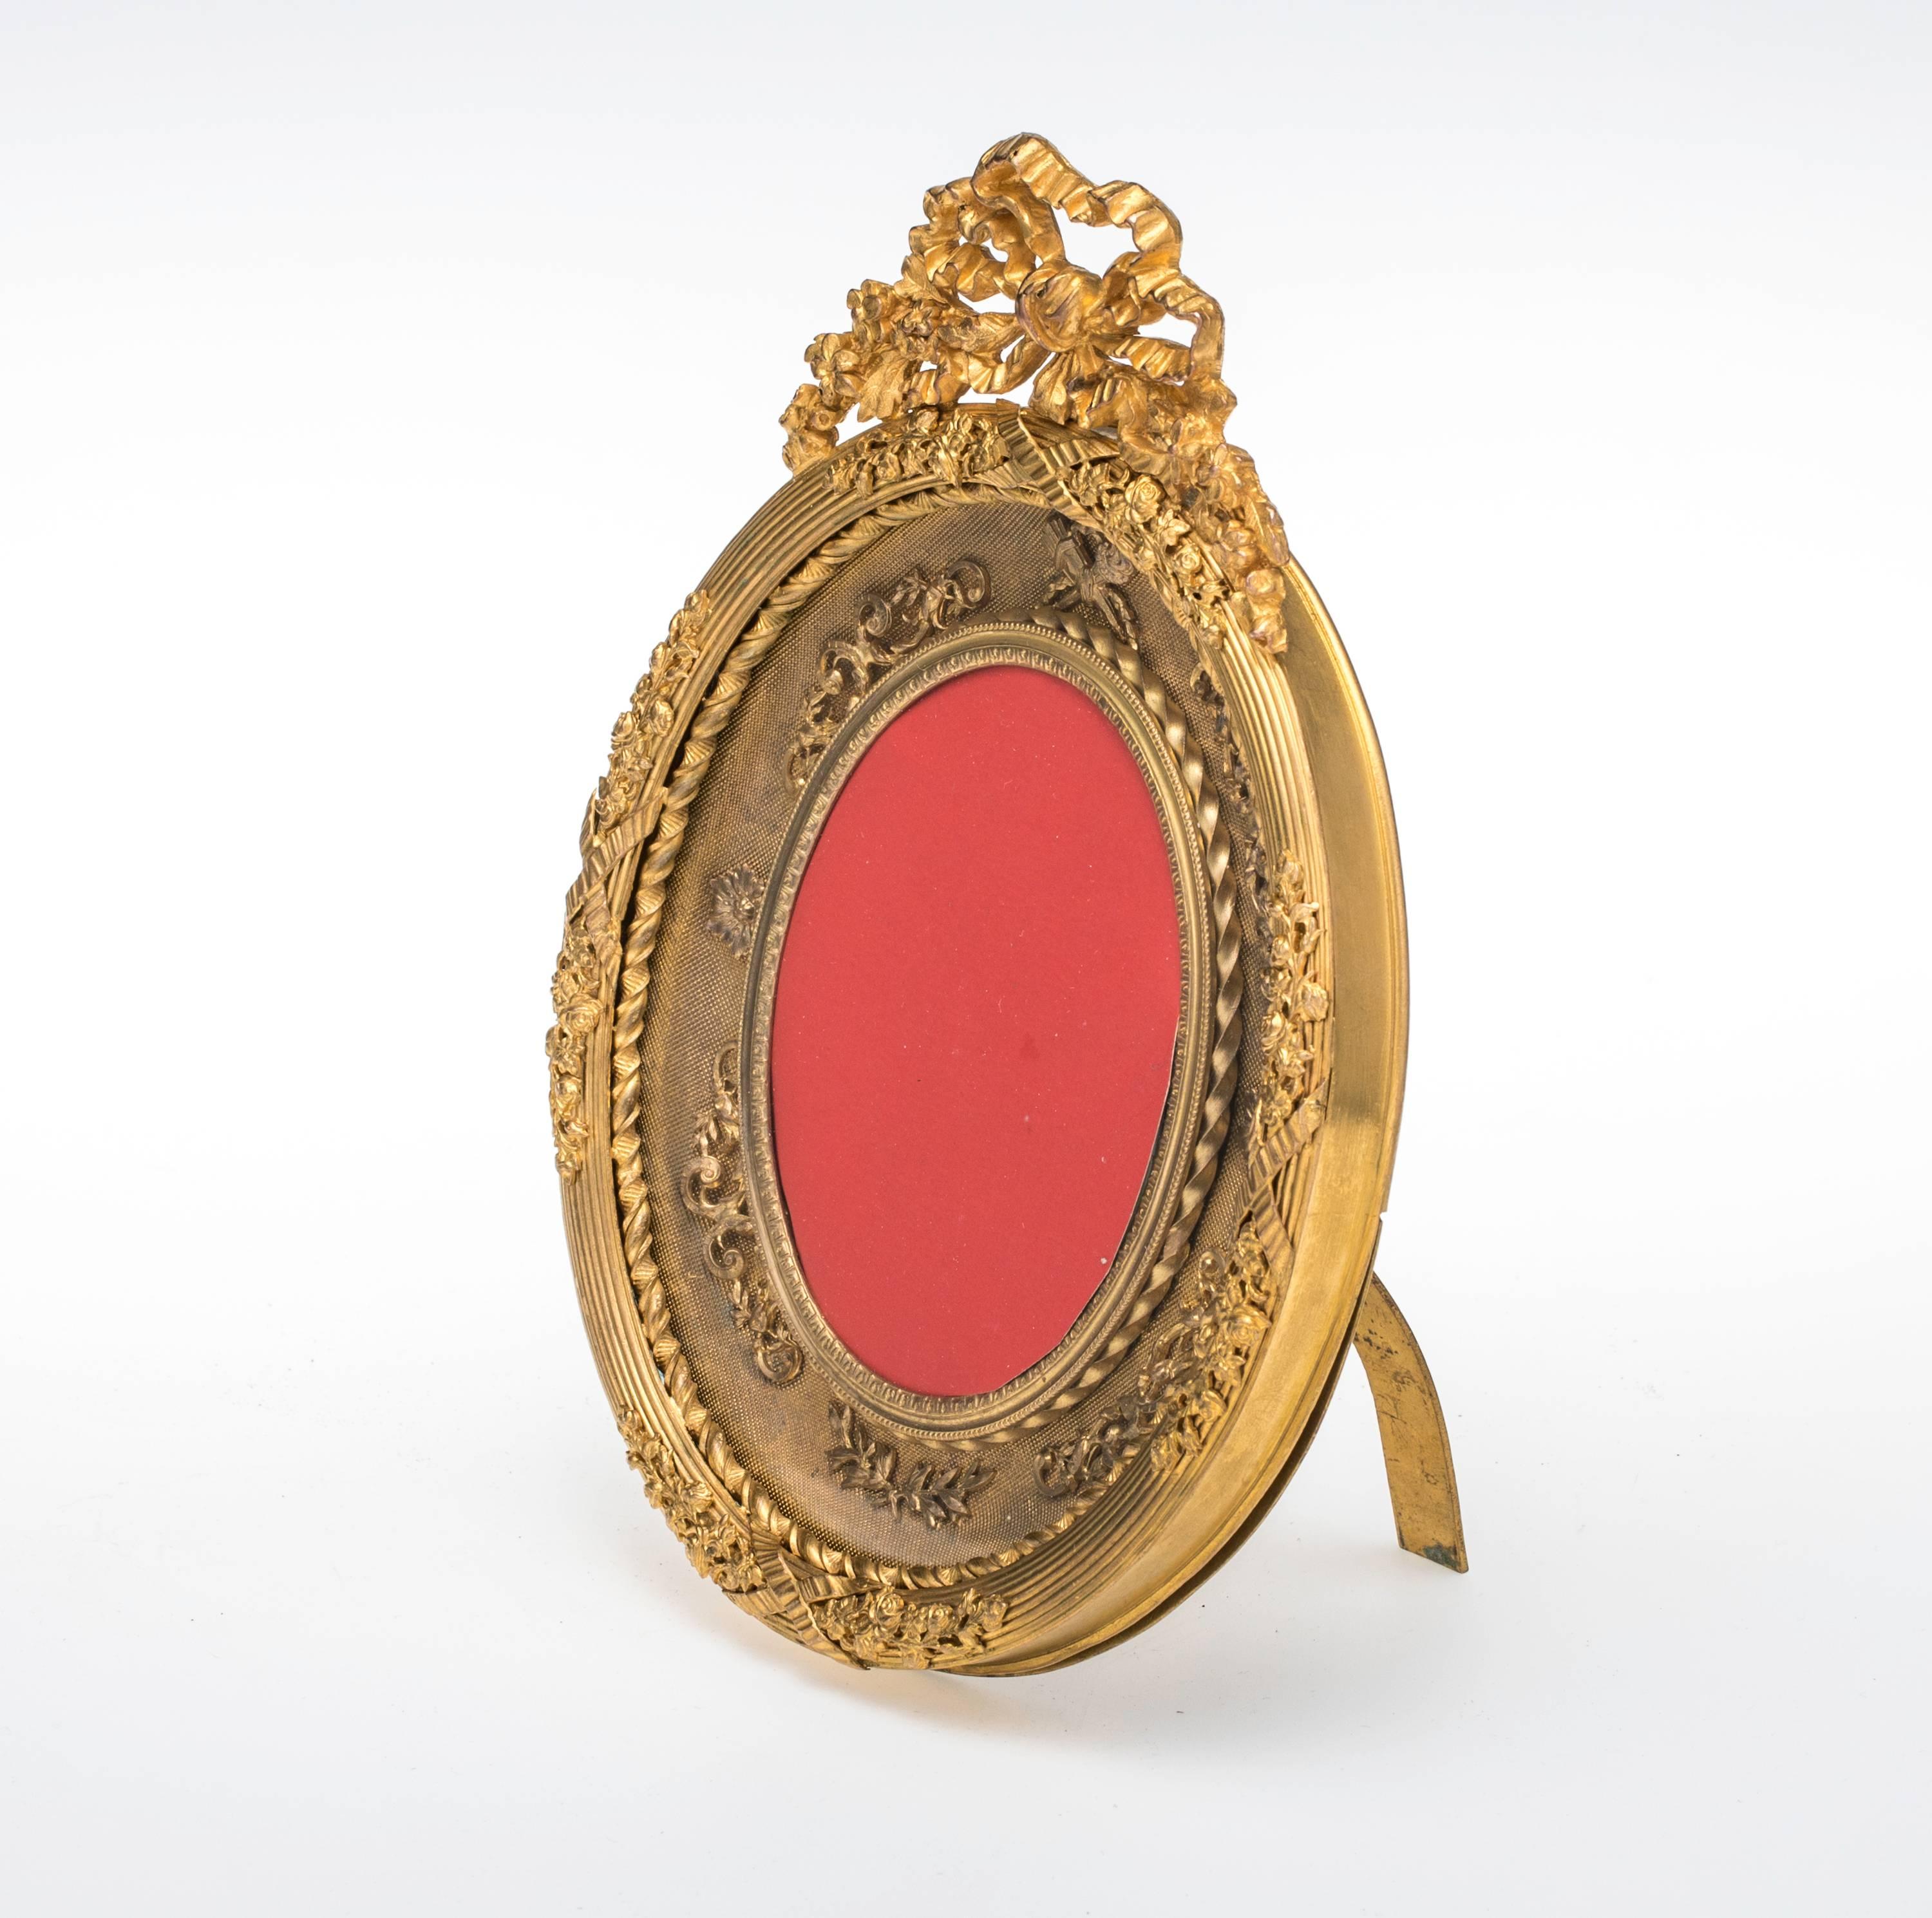 French gilt bronze Dore  oval picture frame, circa 1880s. Superbly cast detailed with ribbon flowers motif. Back panel is held with turning screw. It sits properly with folding easel stand.